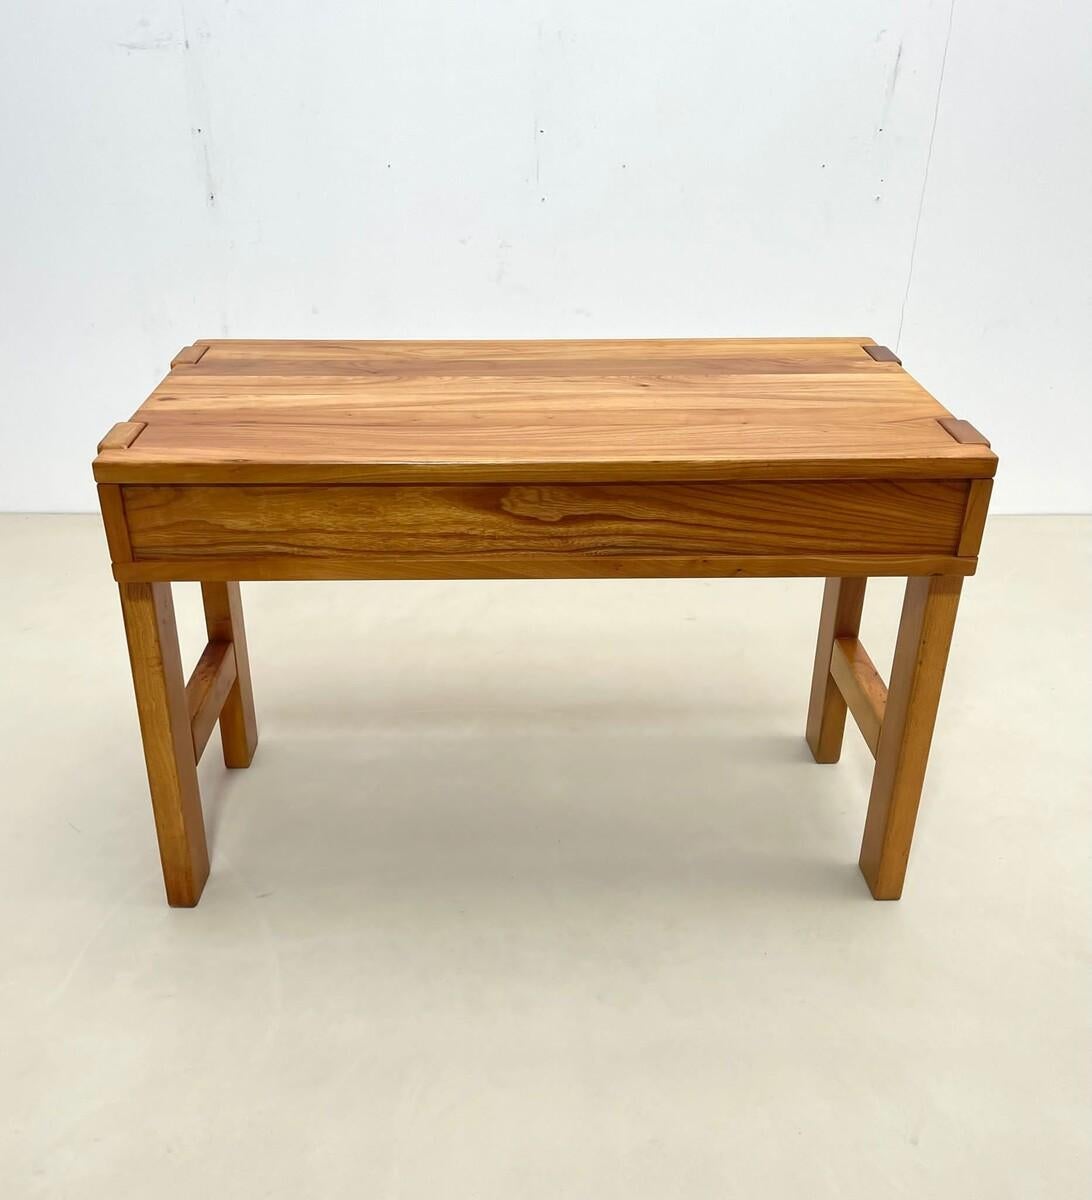 French Mid-Century Brutalist Pine Drrawers Desk by Maison Regain, France 1960s For Sale